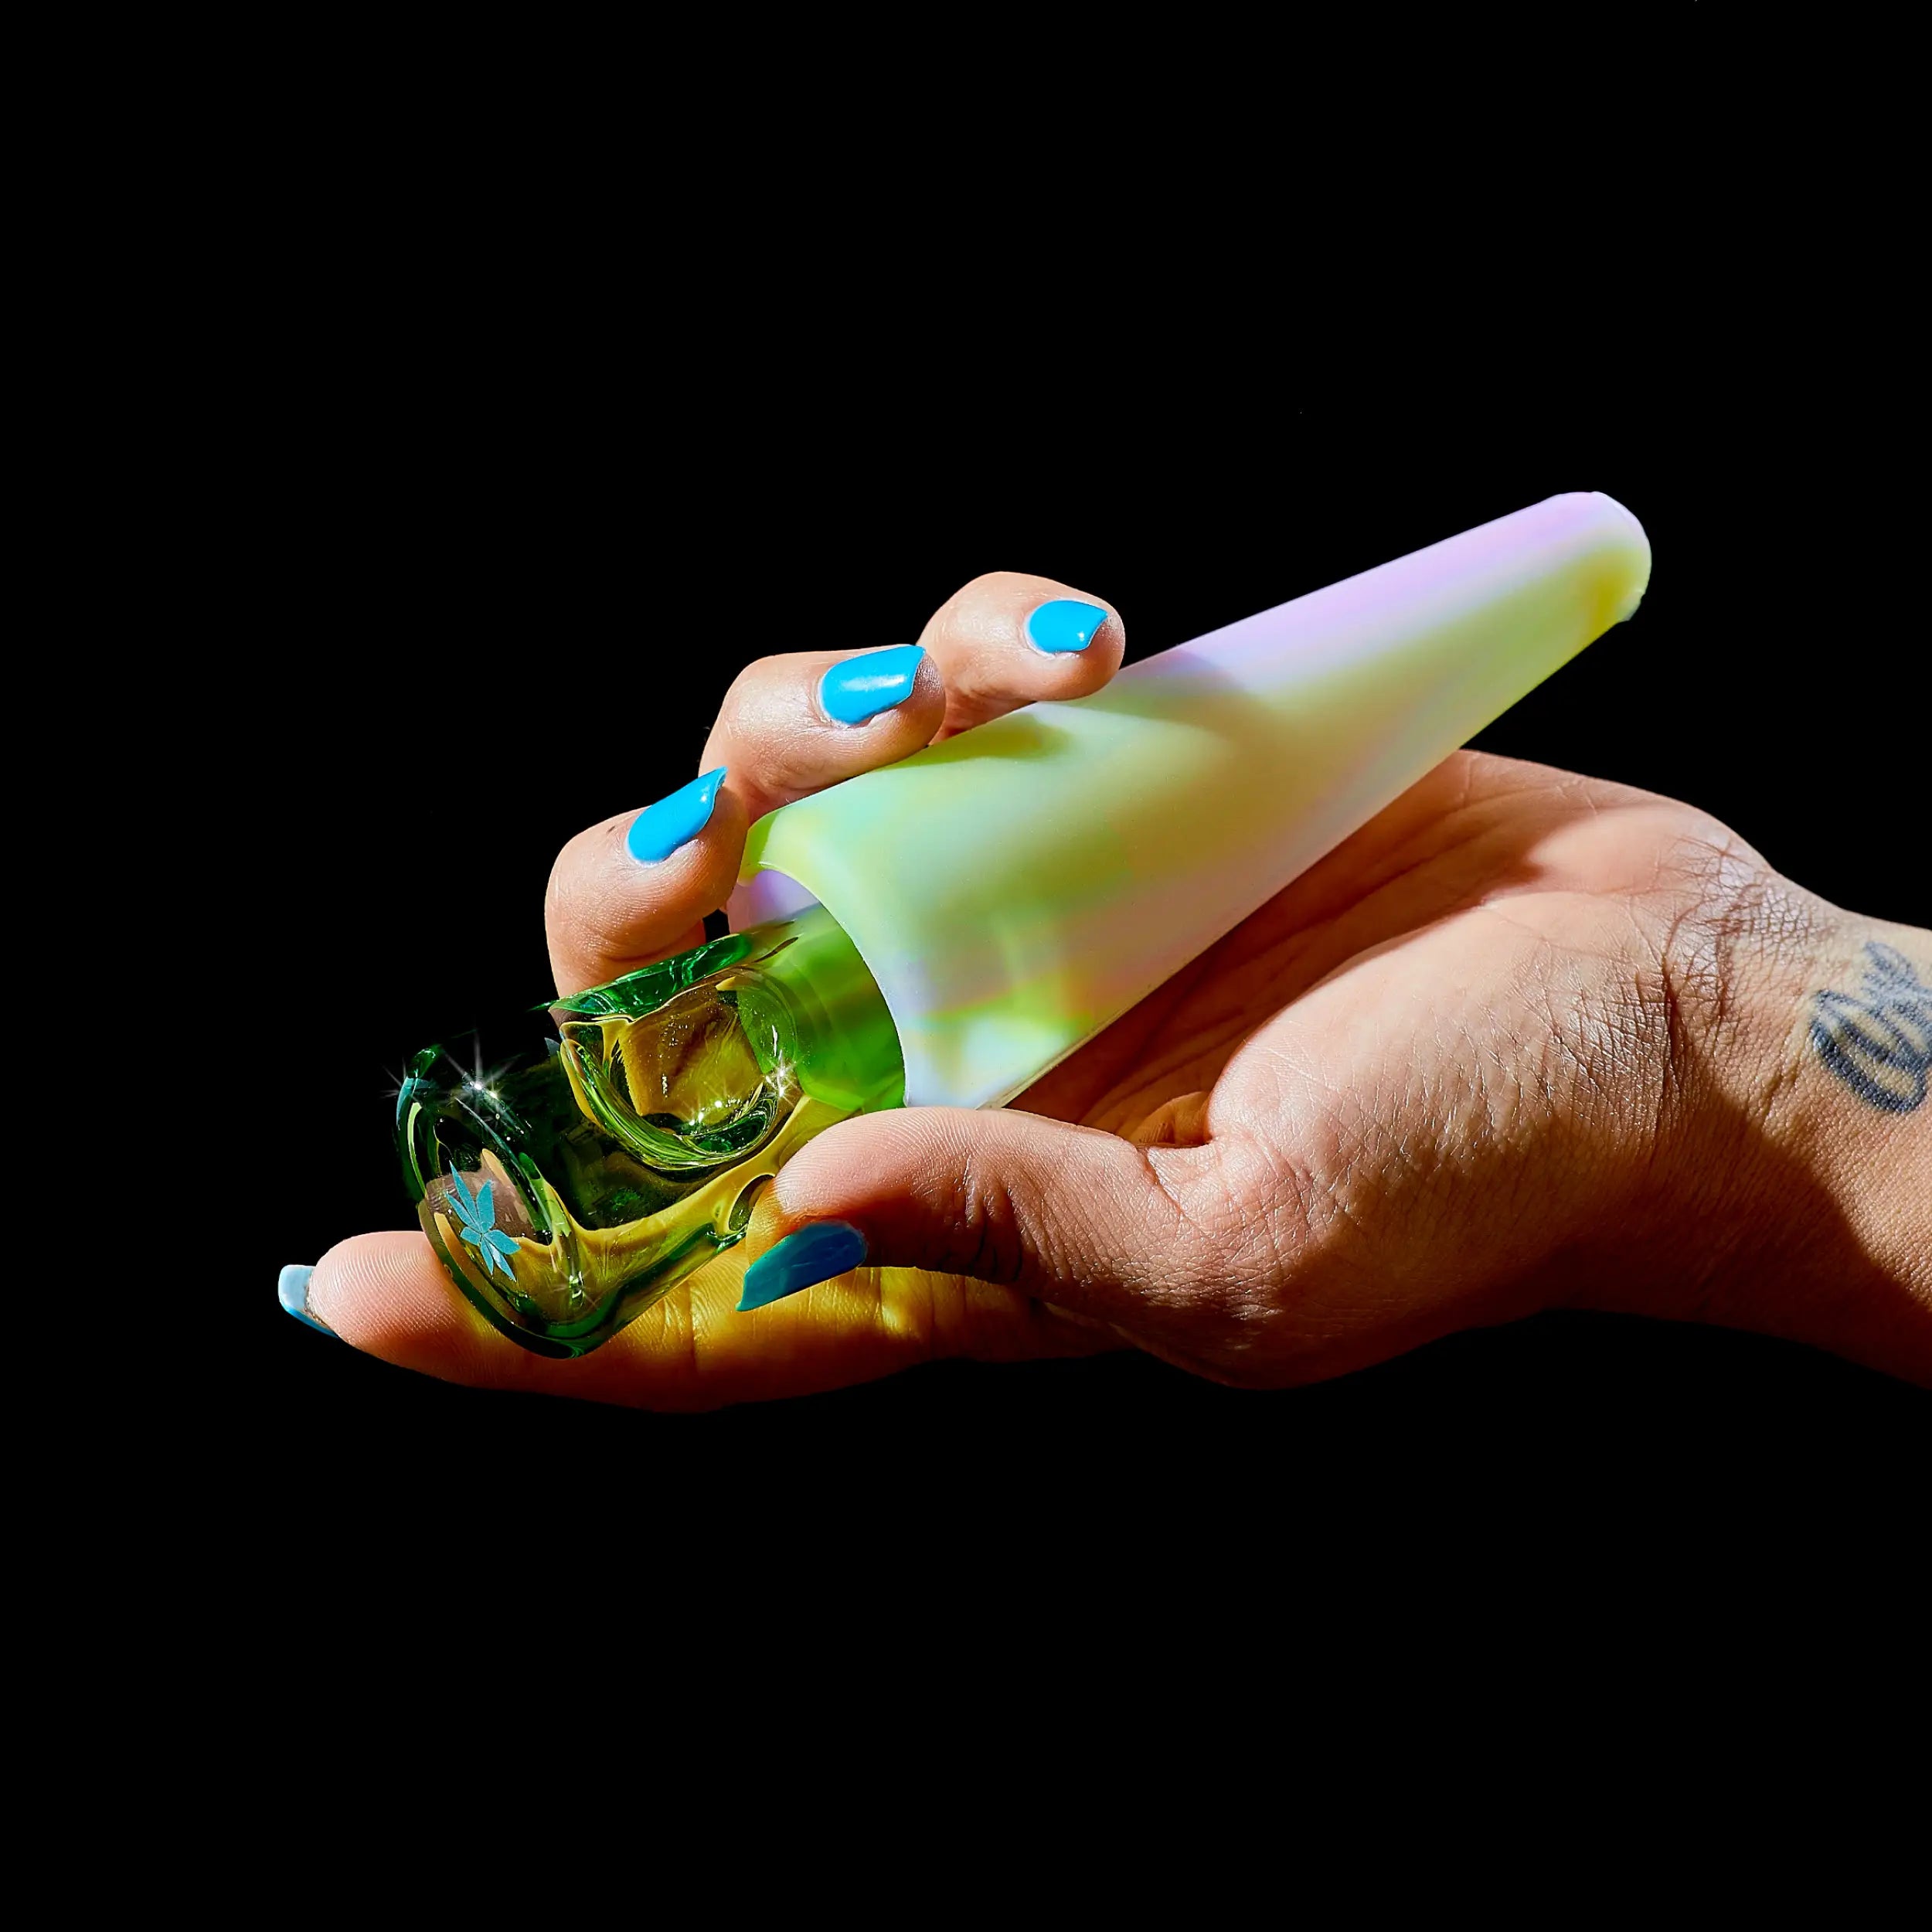 a green tinted glass portable pipe with a glow-in-the-dark silicone case. A limited edition collaboration between Session Goods and Weedfeed